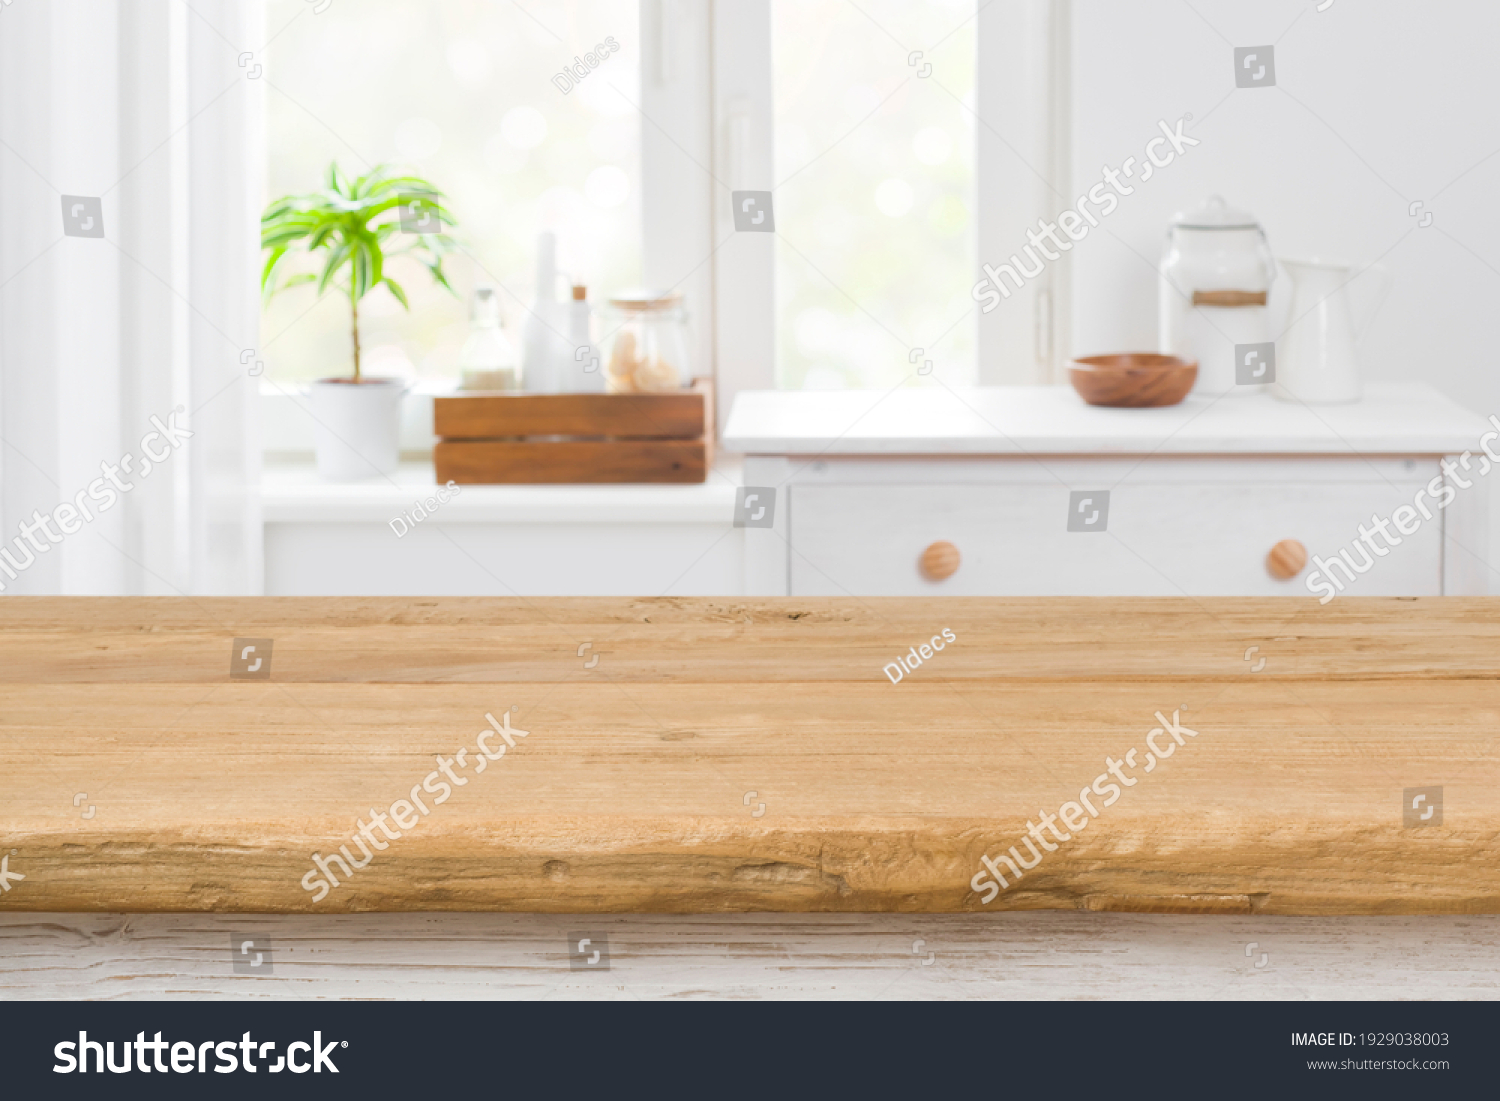 Rough texture table for product display before blurred kitchen window #1929038003